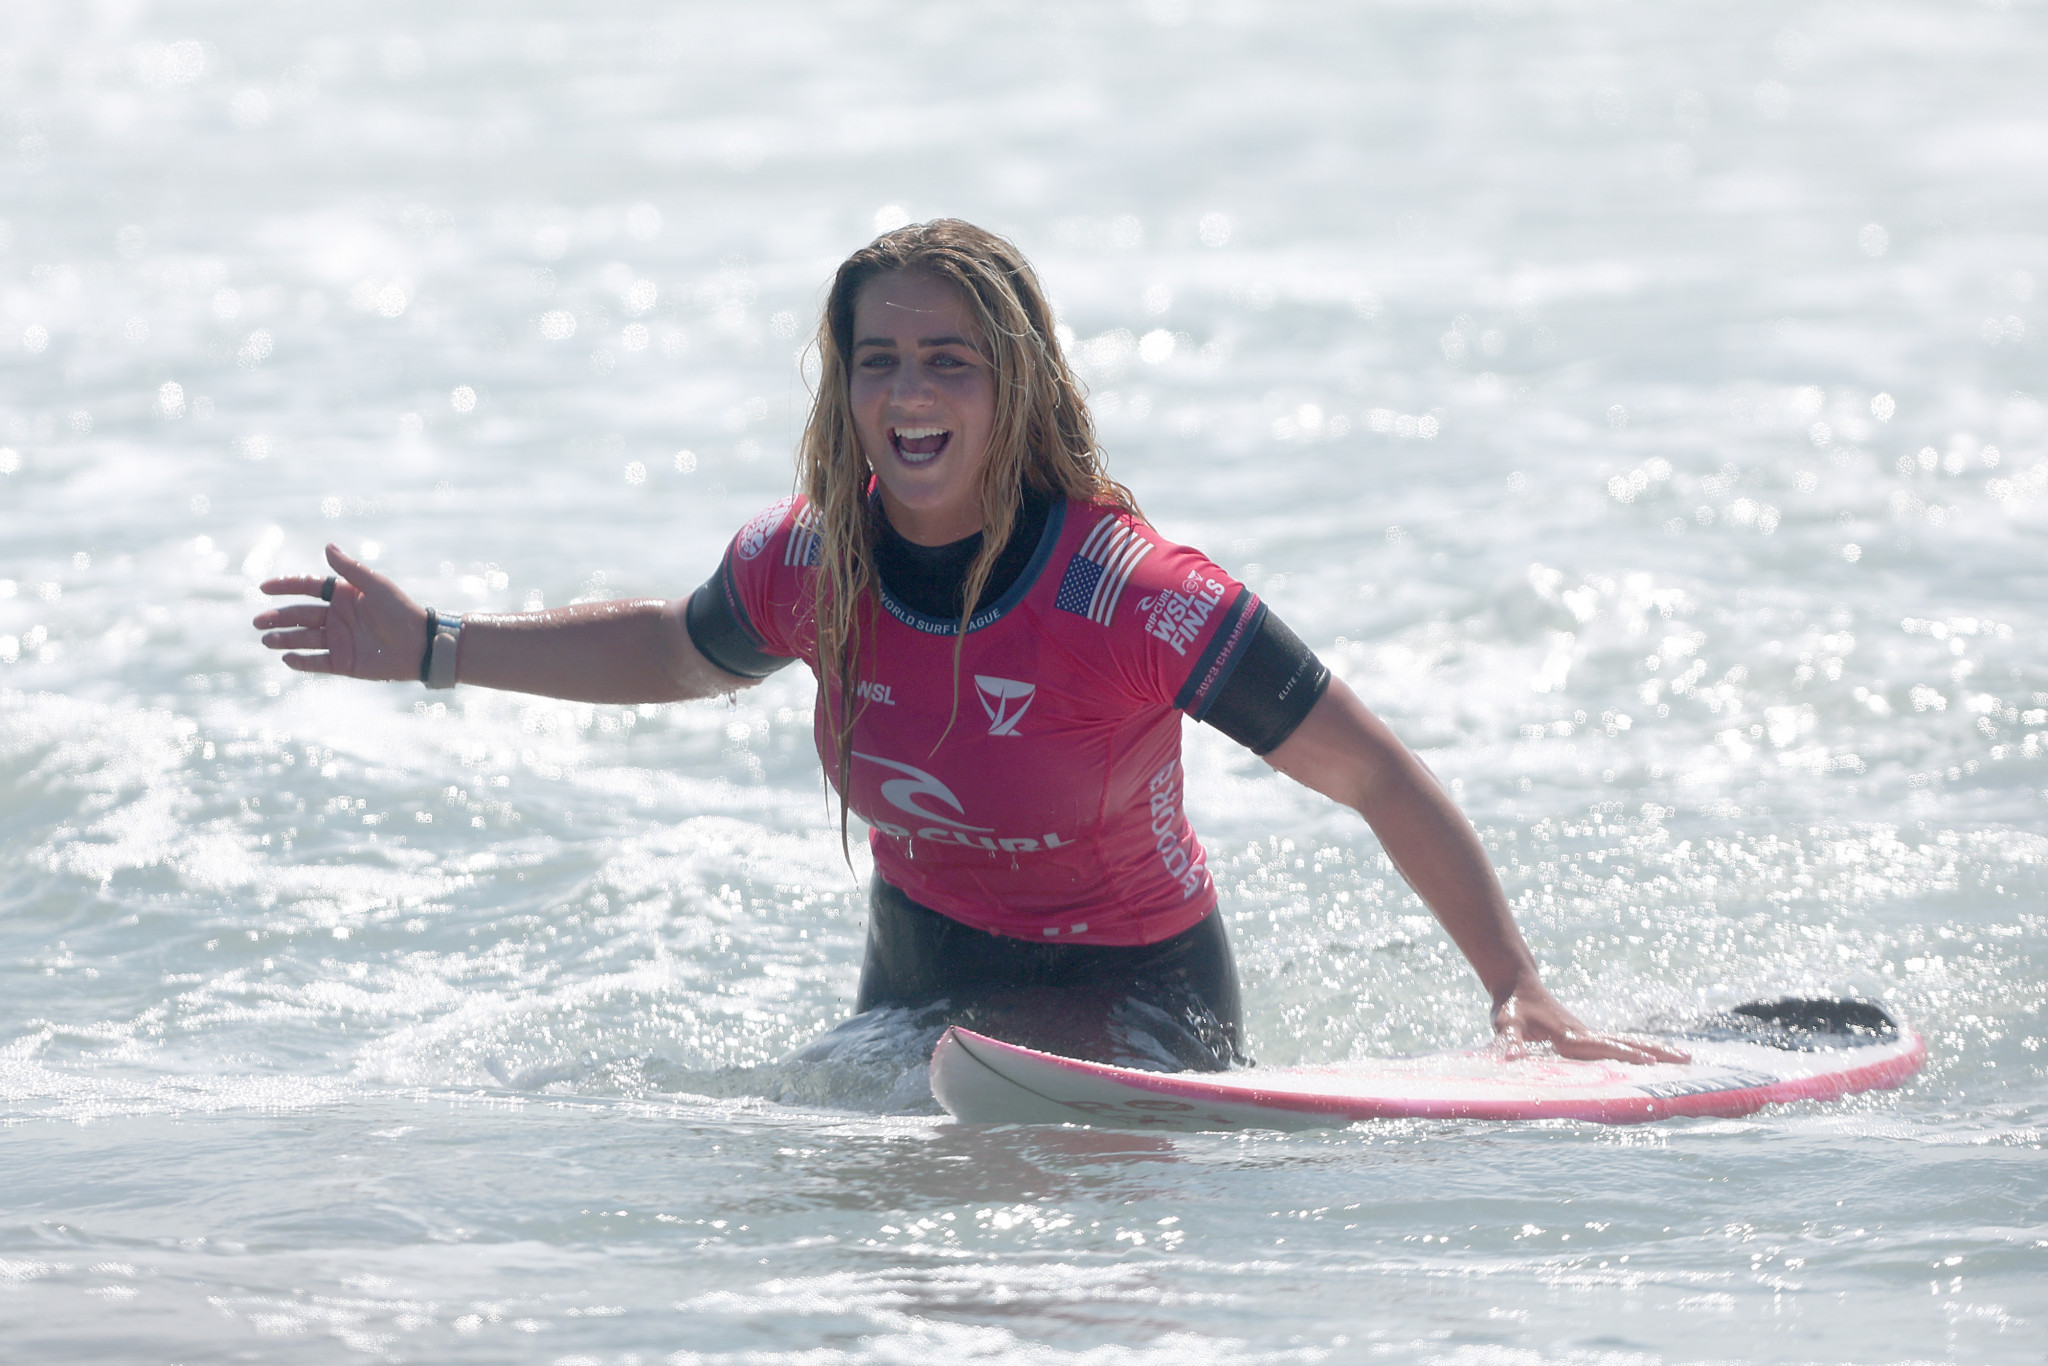 Caroline Marks took the second American berth through the WSL for women's surfing at Paris 2024 ©Getty Images